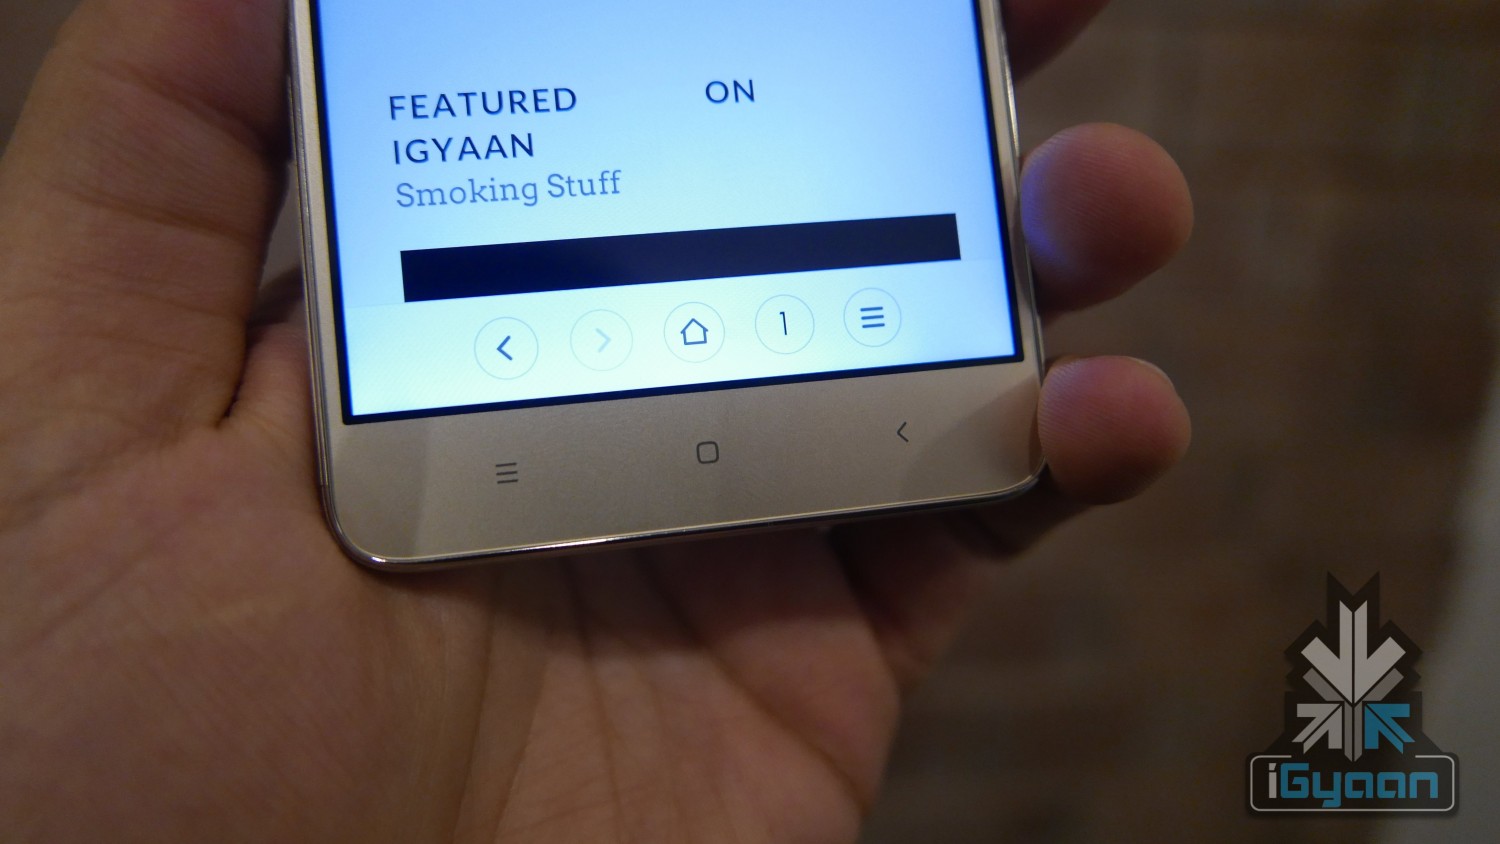 Redmi note 3 igyaan review 6